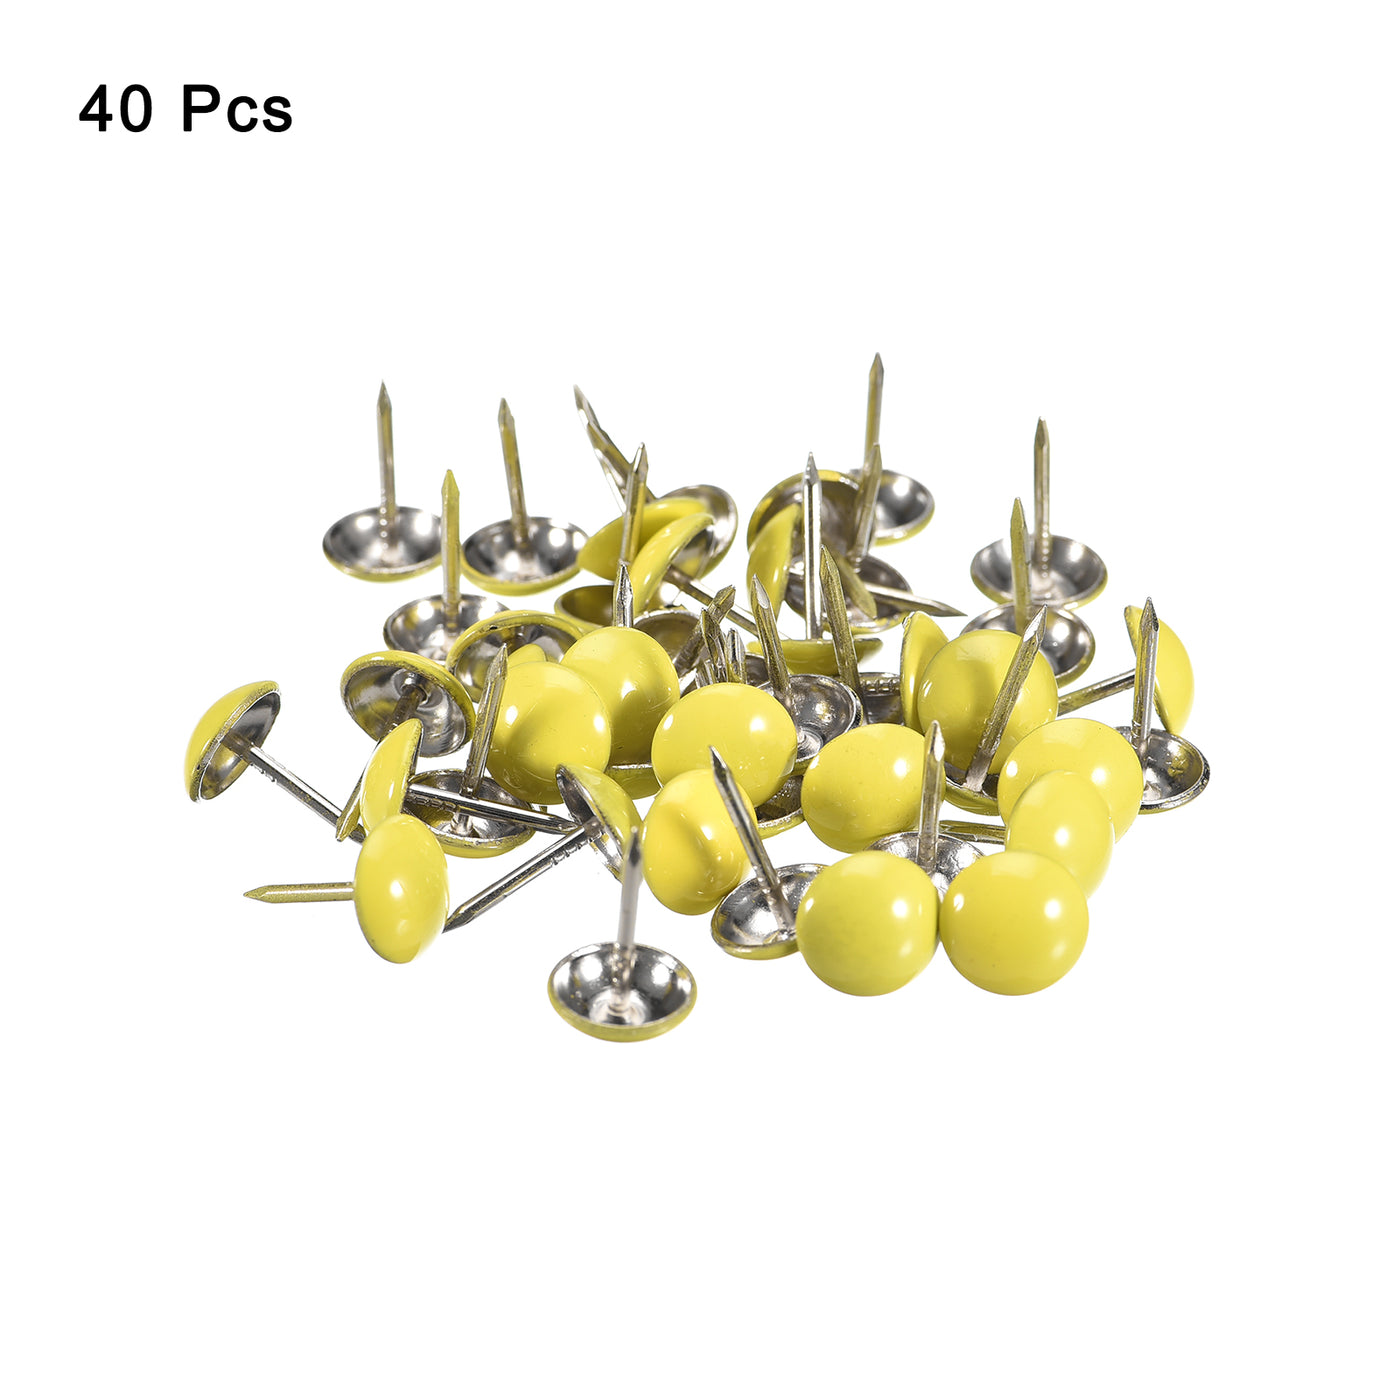 uxcell Uxcell 40Pcs 11mmx17mm Round Decorative Upholstery Tacks Furniture Nails, Yellow